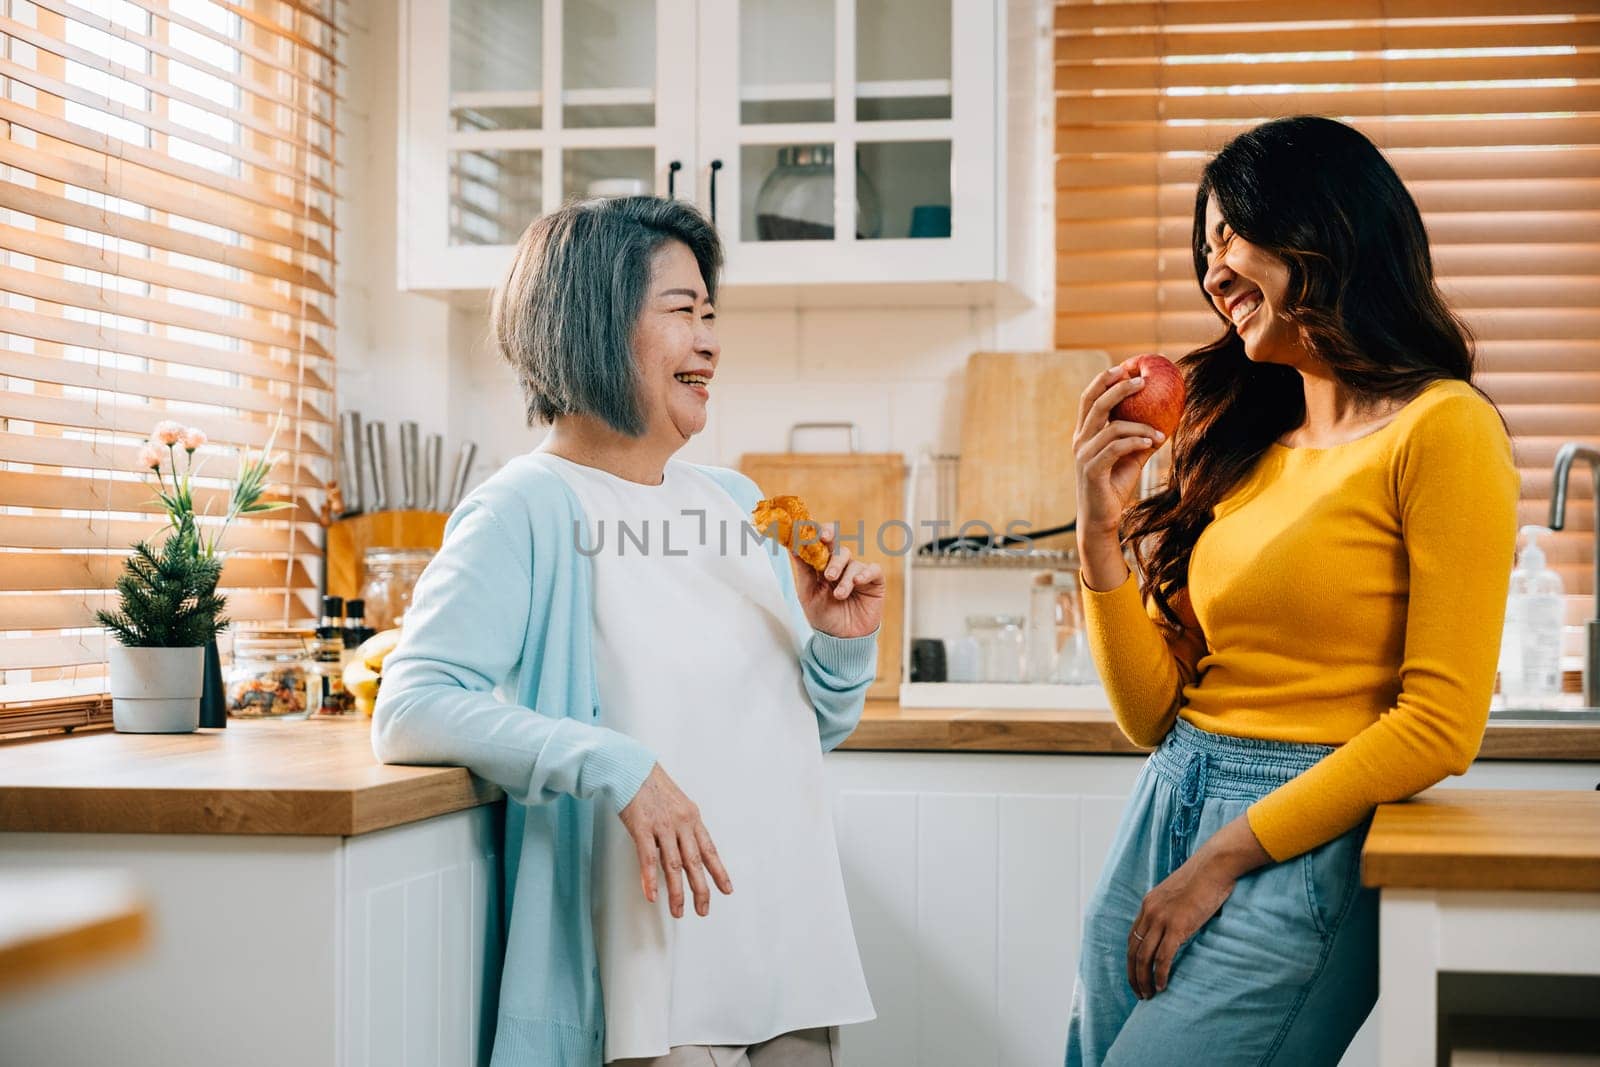 A smiling mother and her adult daughter, an attractive young woman, stand together in the kitchen, holding an apple. Their bond radiates happiness and family togetherness.